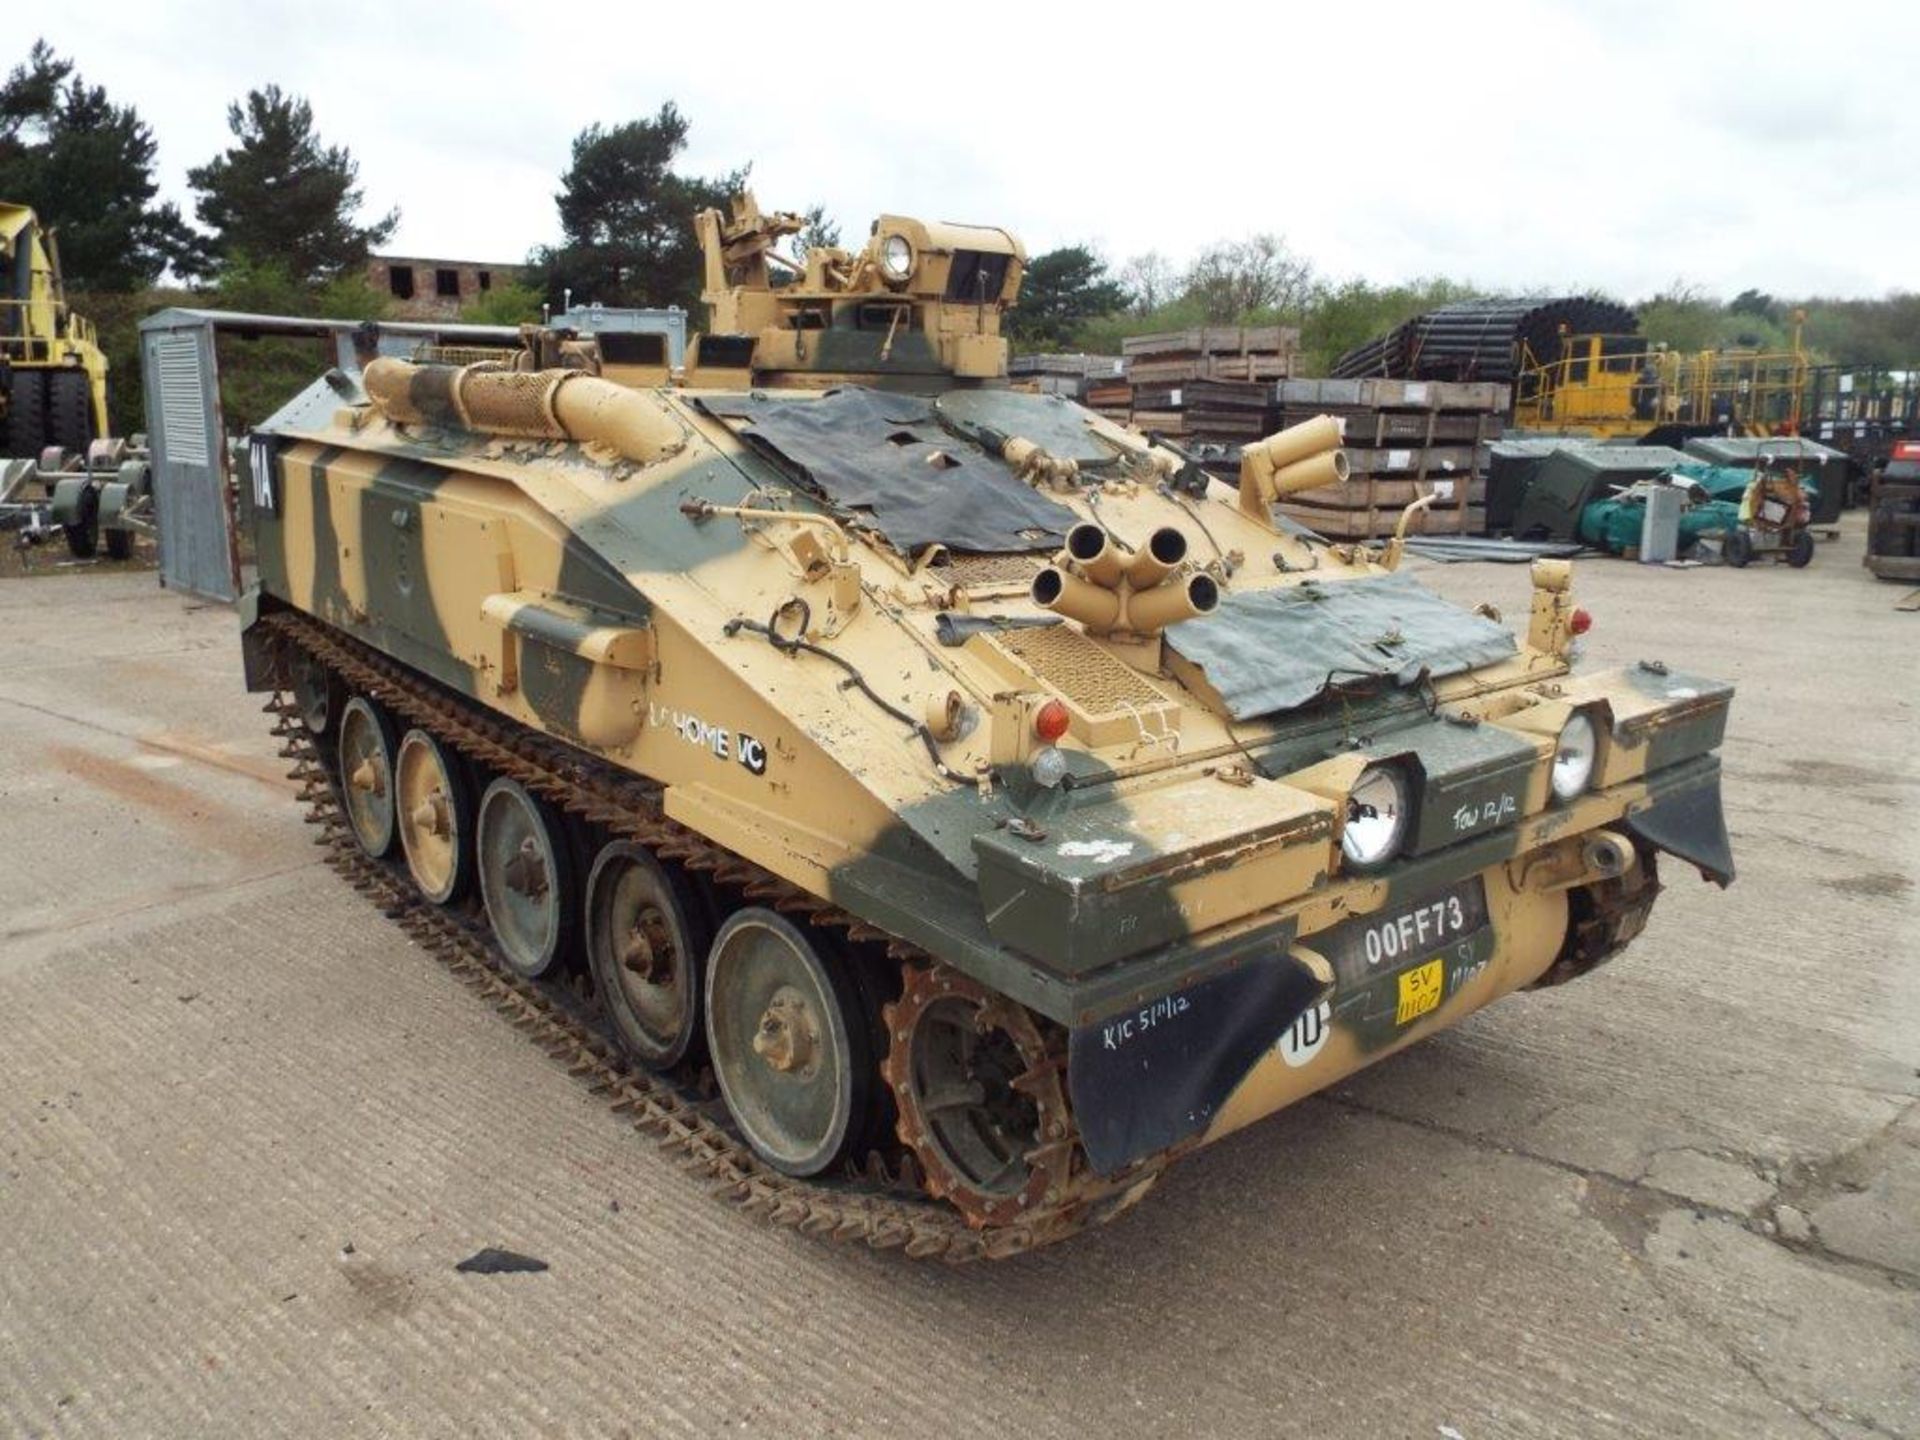 CVRT (Combat Vehicle Reconnaissance Tracked) Spartan Armoured Personnel Carrier